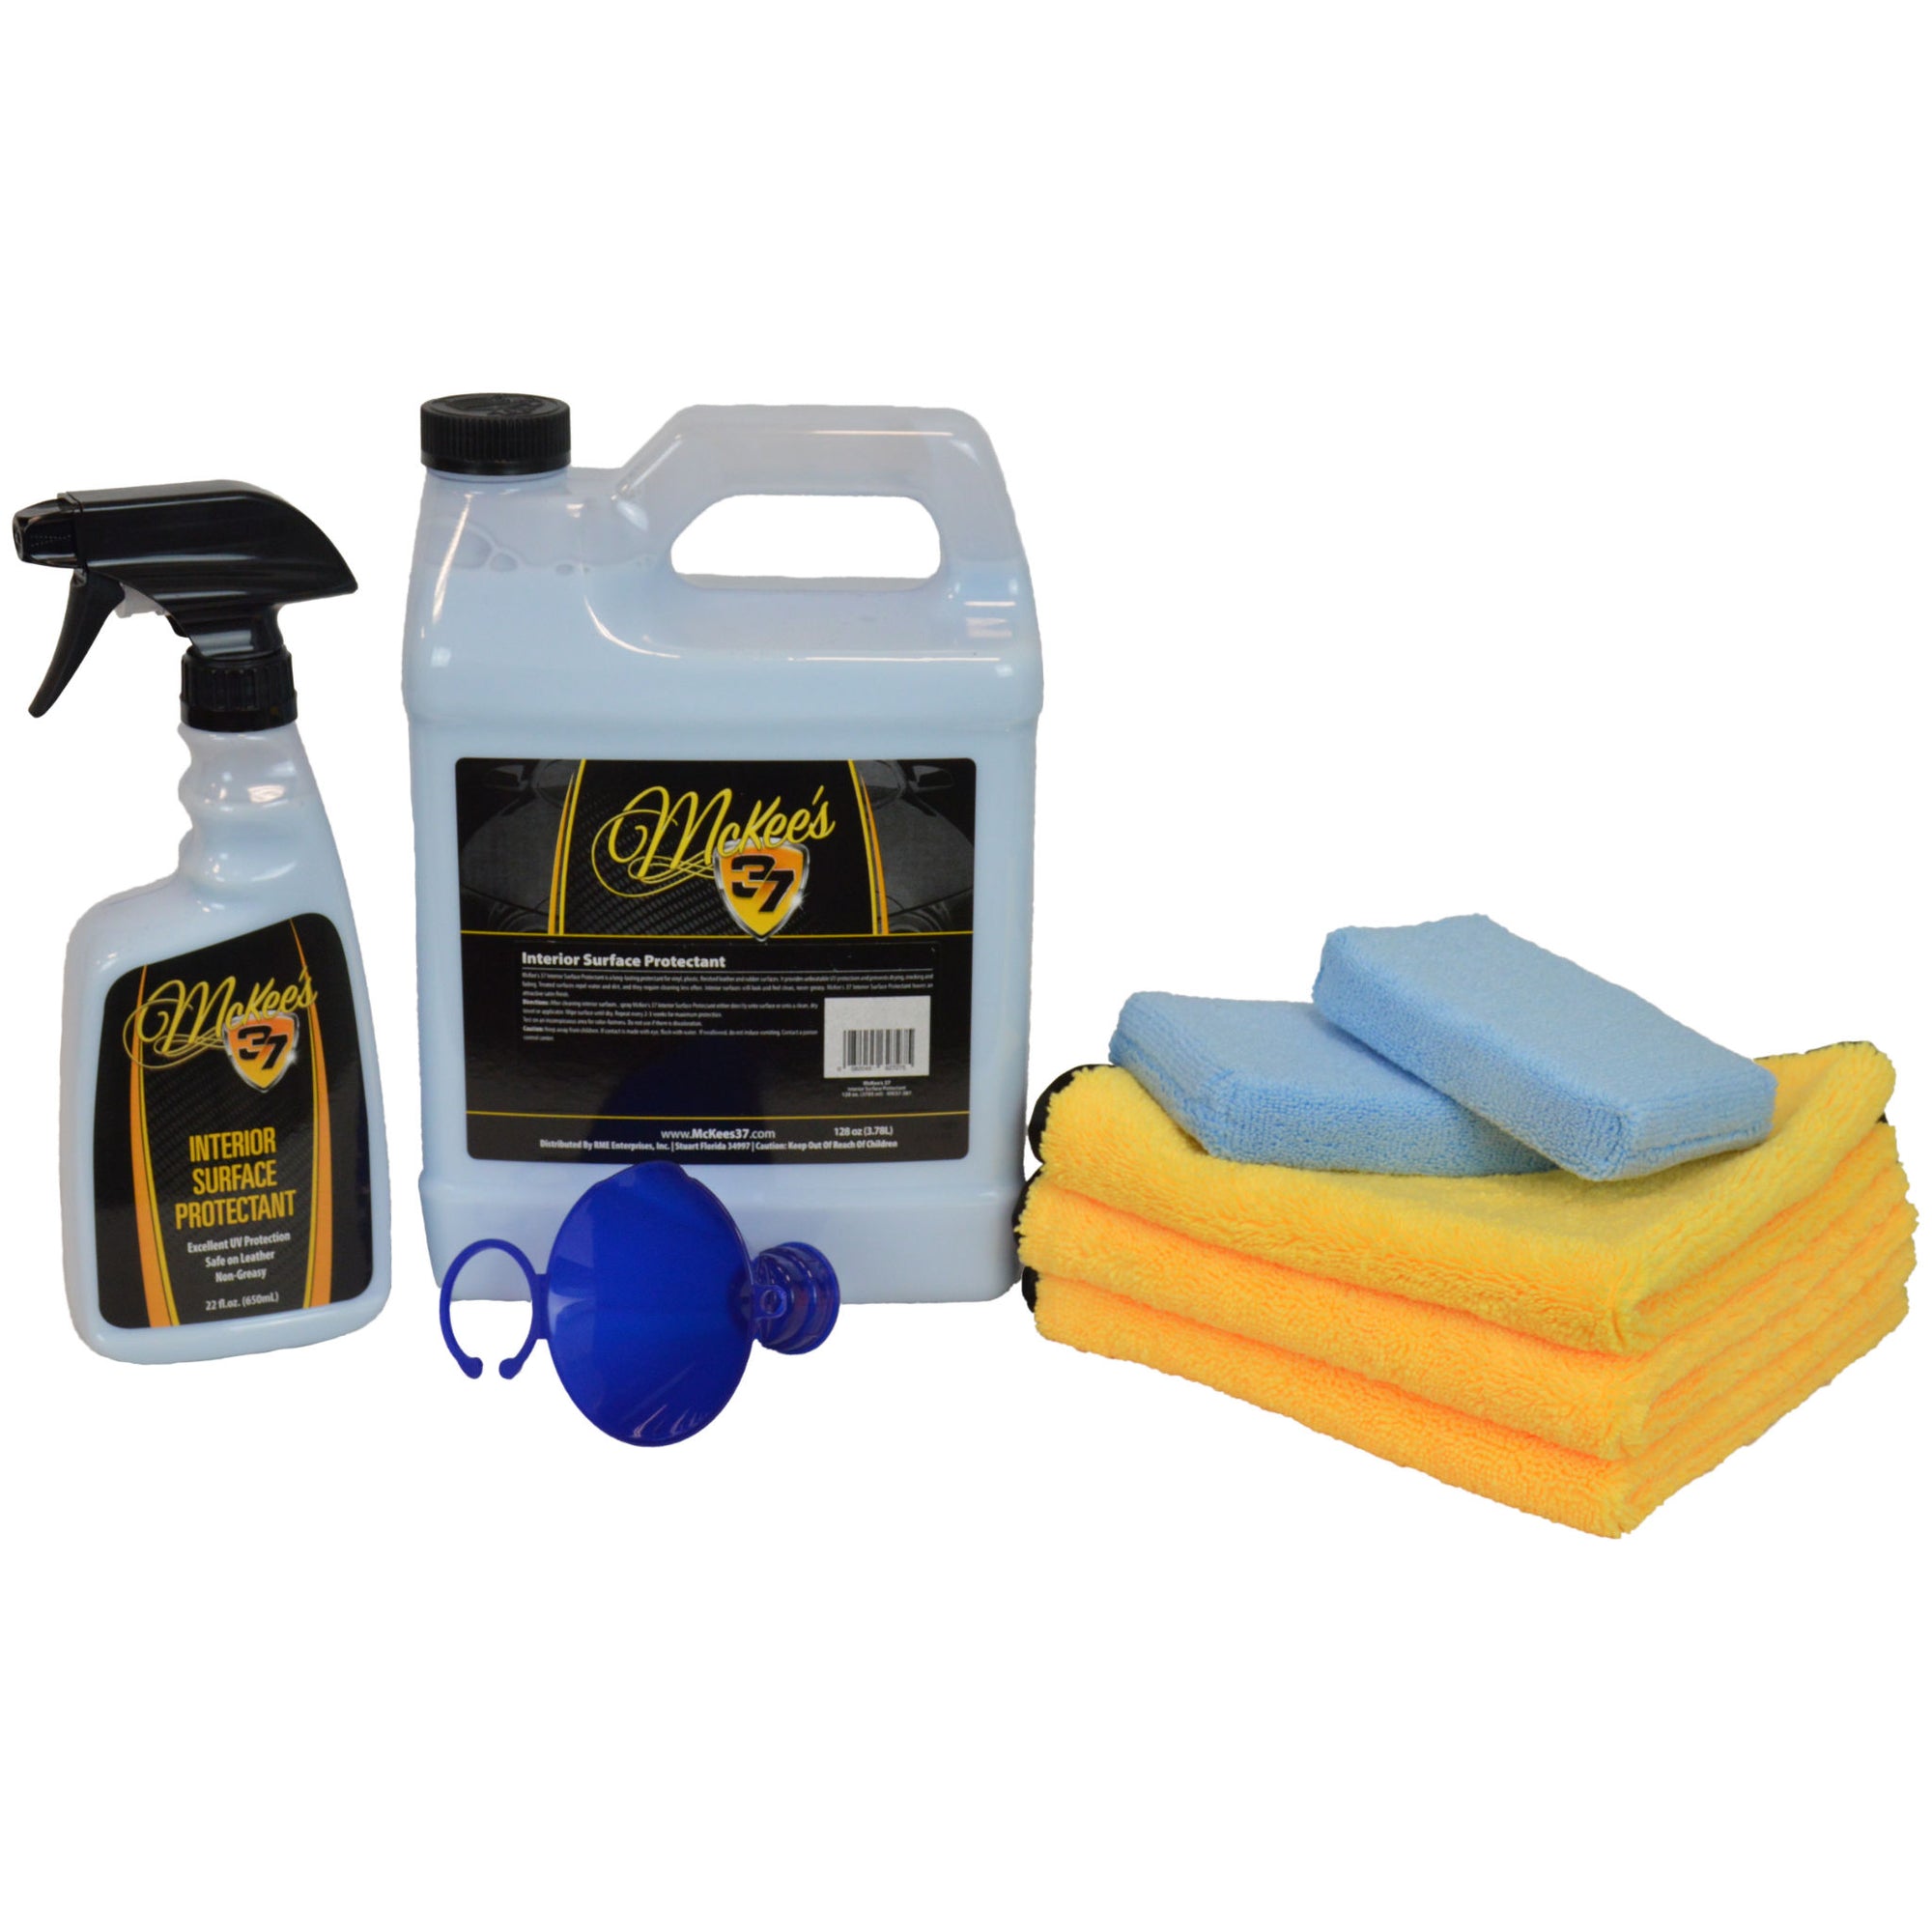 Interior Surface Protectant 150 oz. Refill Kit